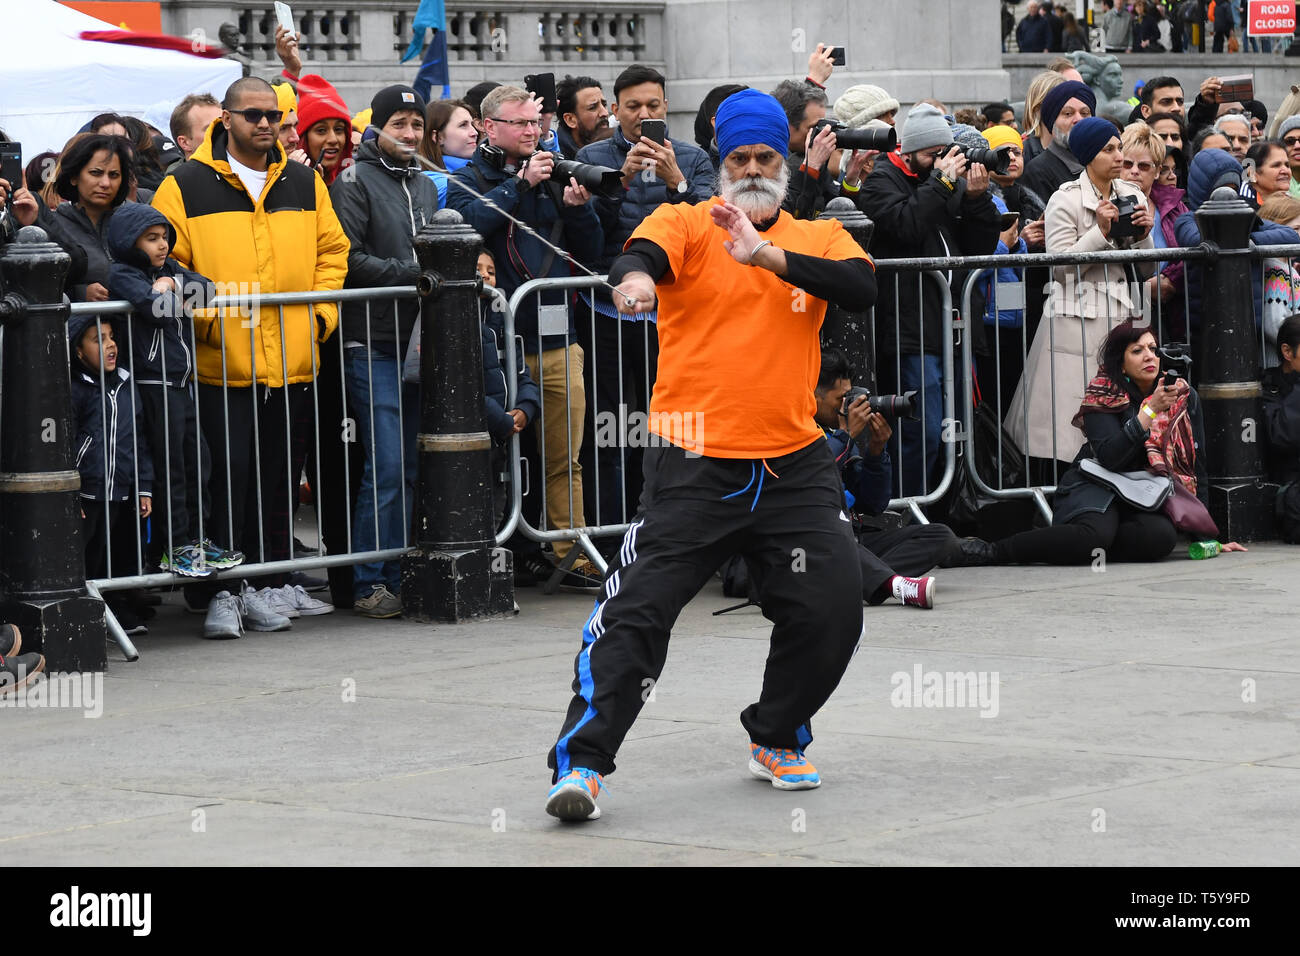 London, England, UK. 27 April 2019. Sikh martial art preforms at Vaisakhi Festival is a Sikh New Year in Trafalgar Square, London, UK. Credit: Picture Capital/Alamy Live News Stock Photo